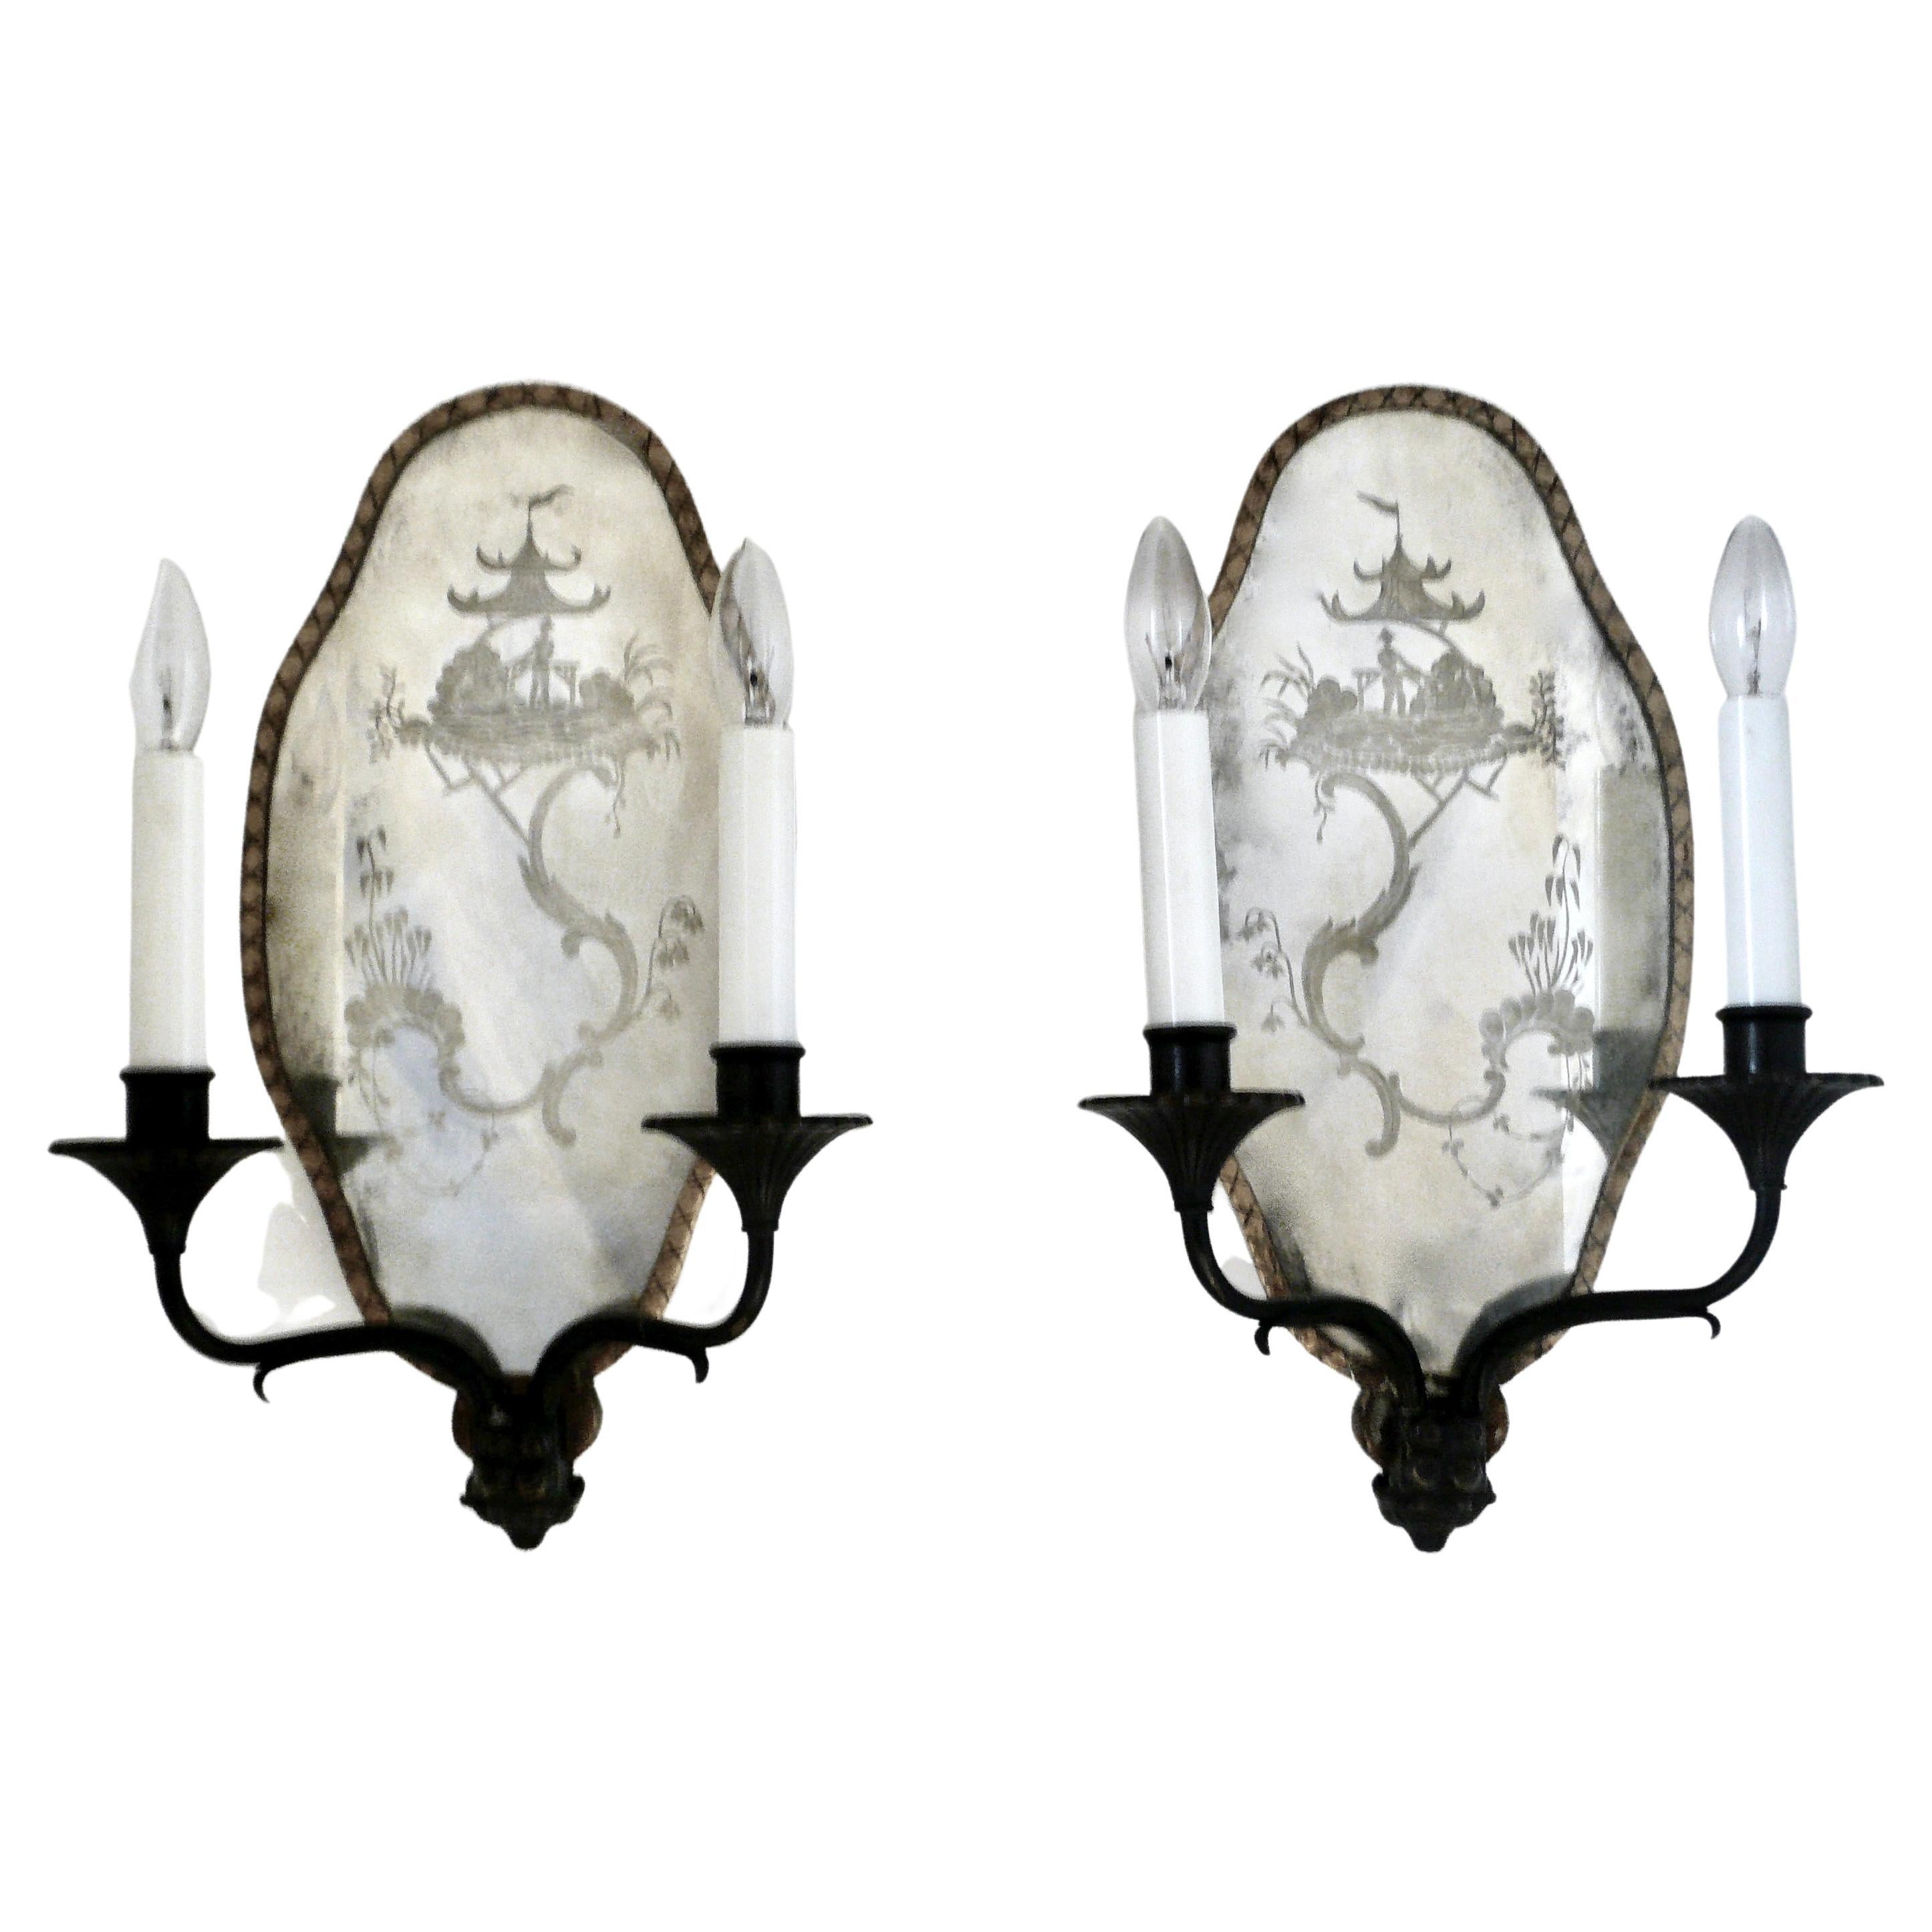 Pair Chinoiserie Design Mirror Back Sconces, Attributed to E.F. Caldwell